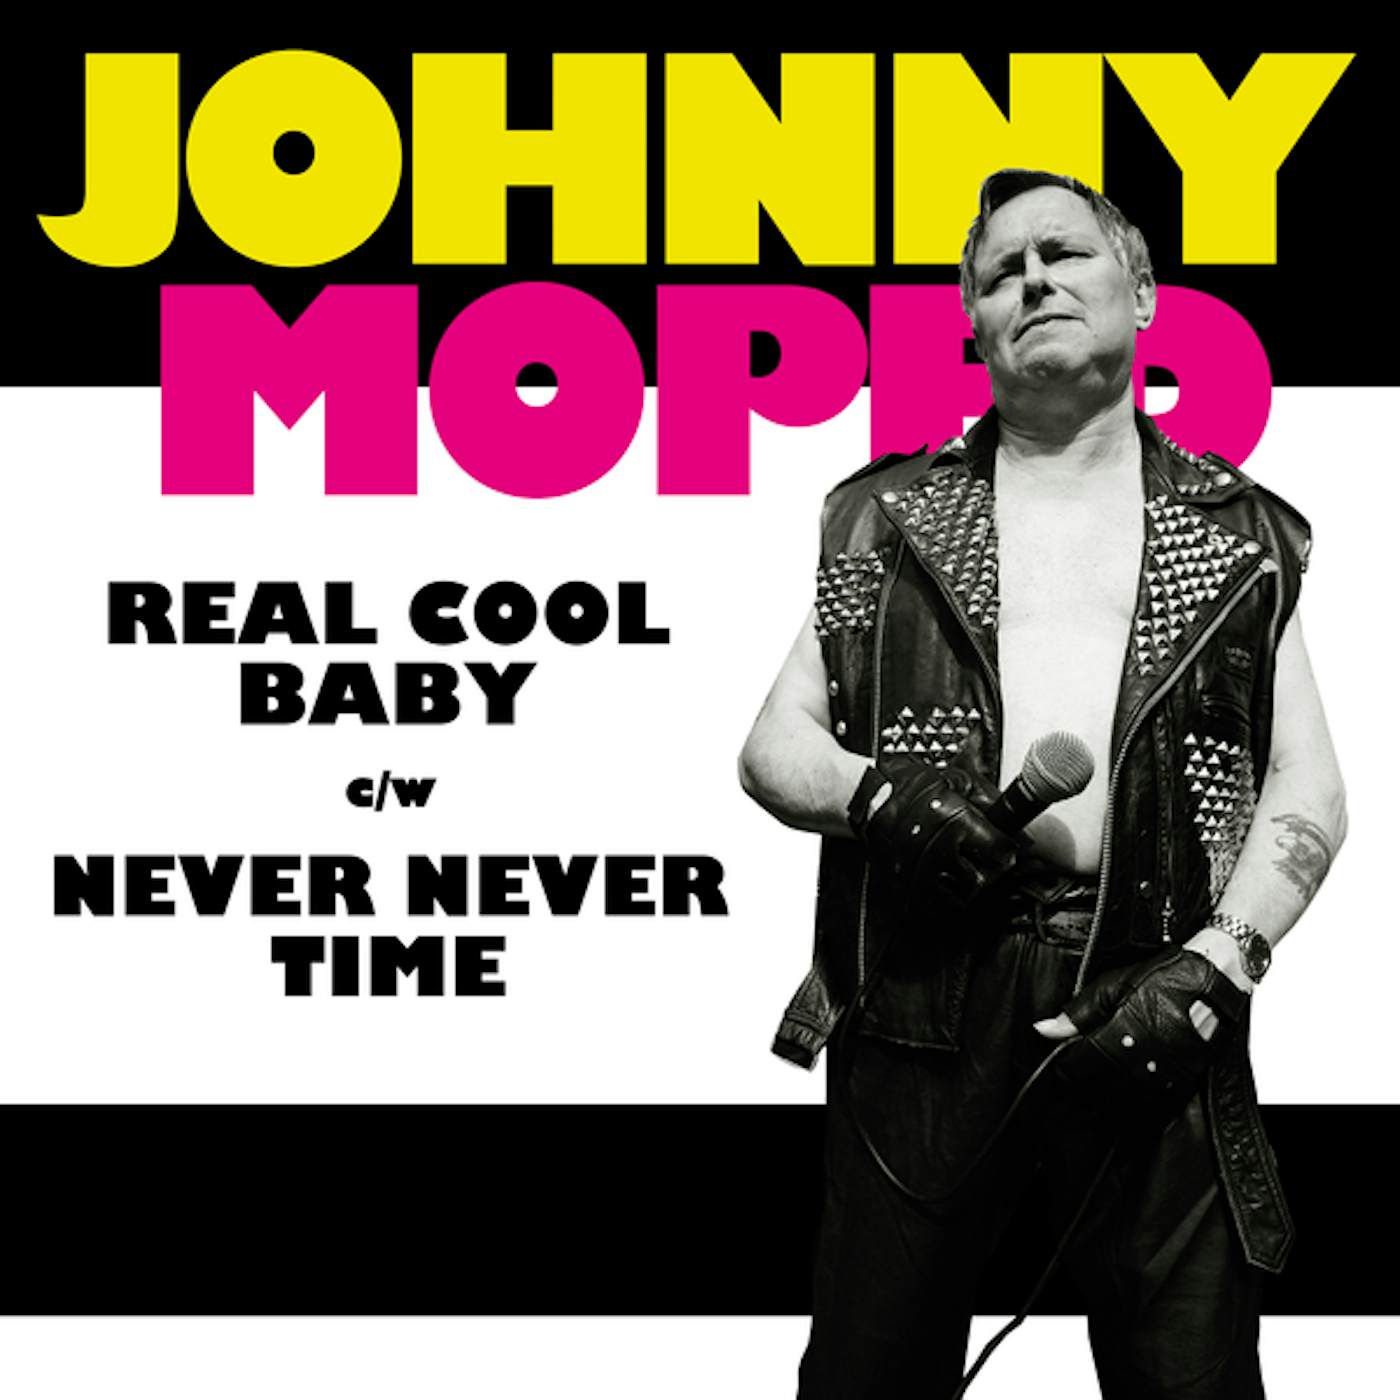 Johnny Moped Real Cool Baby/Never Never Time Vinyl Record